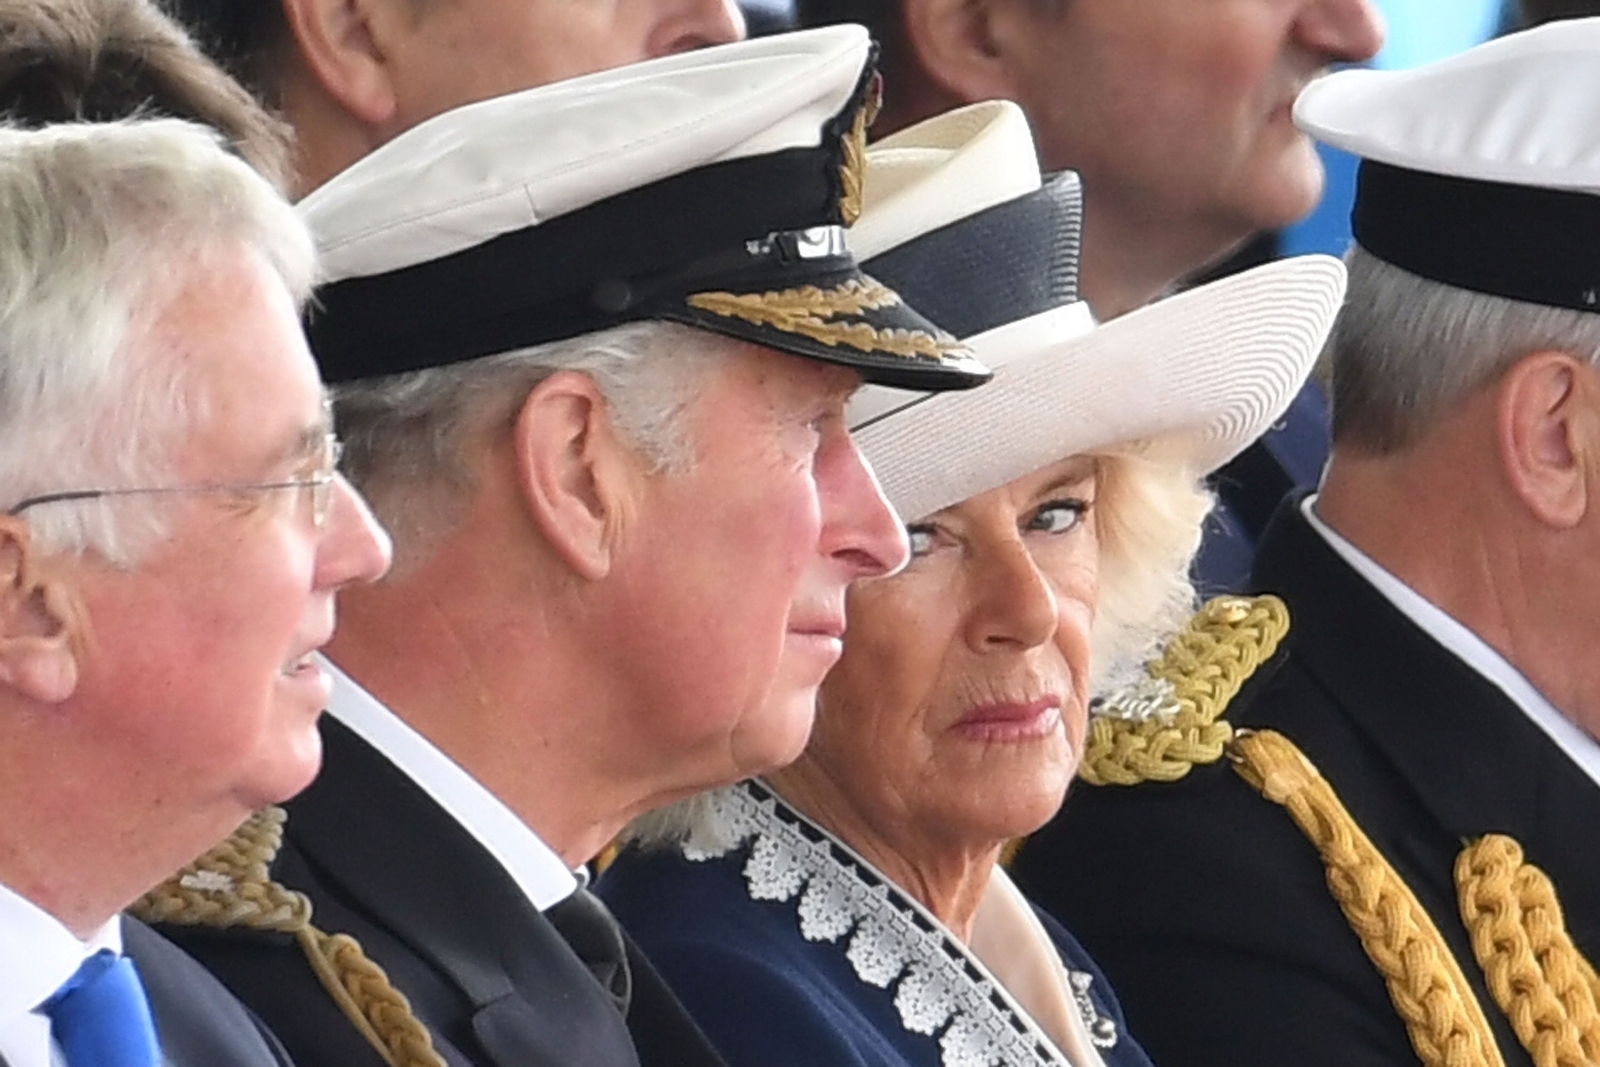 Prince Harry, William, palace aides want to take ‘wicked’ Camilla down: report